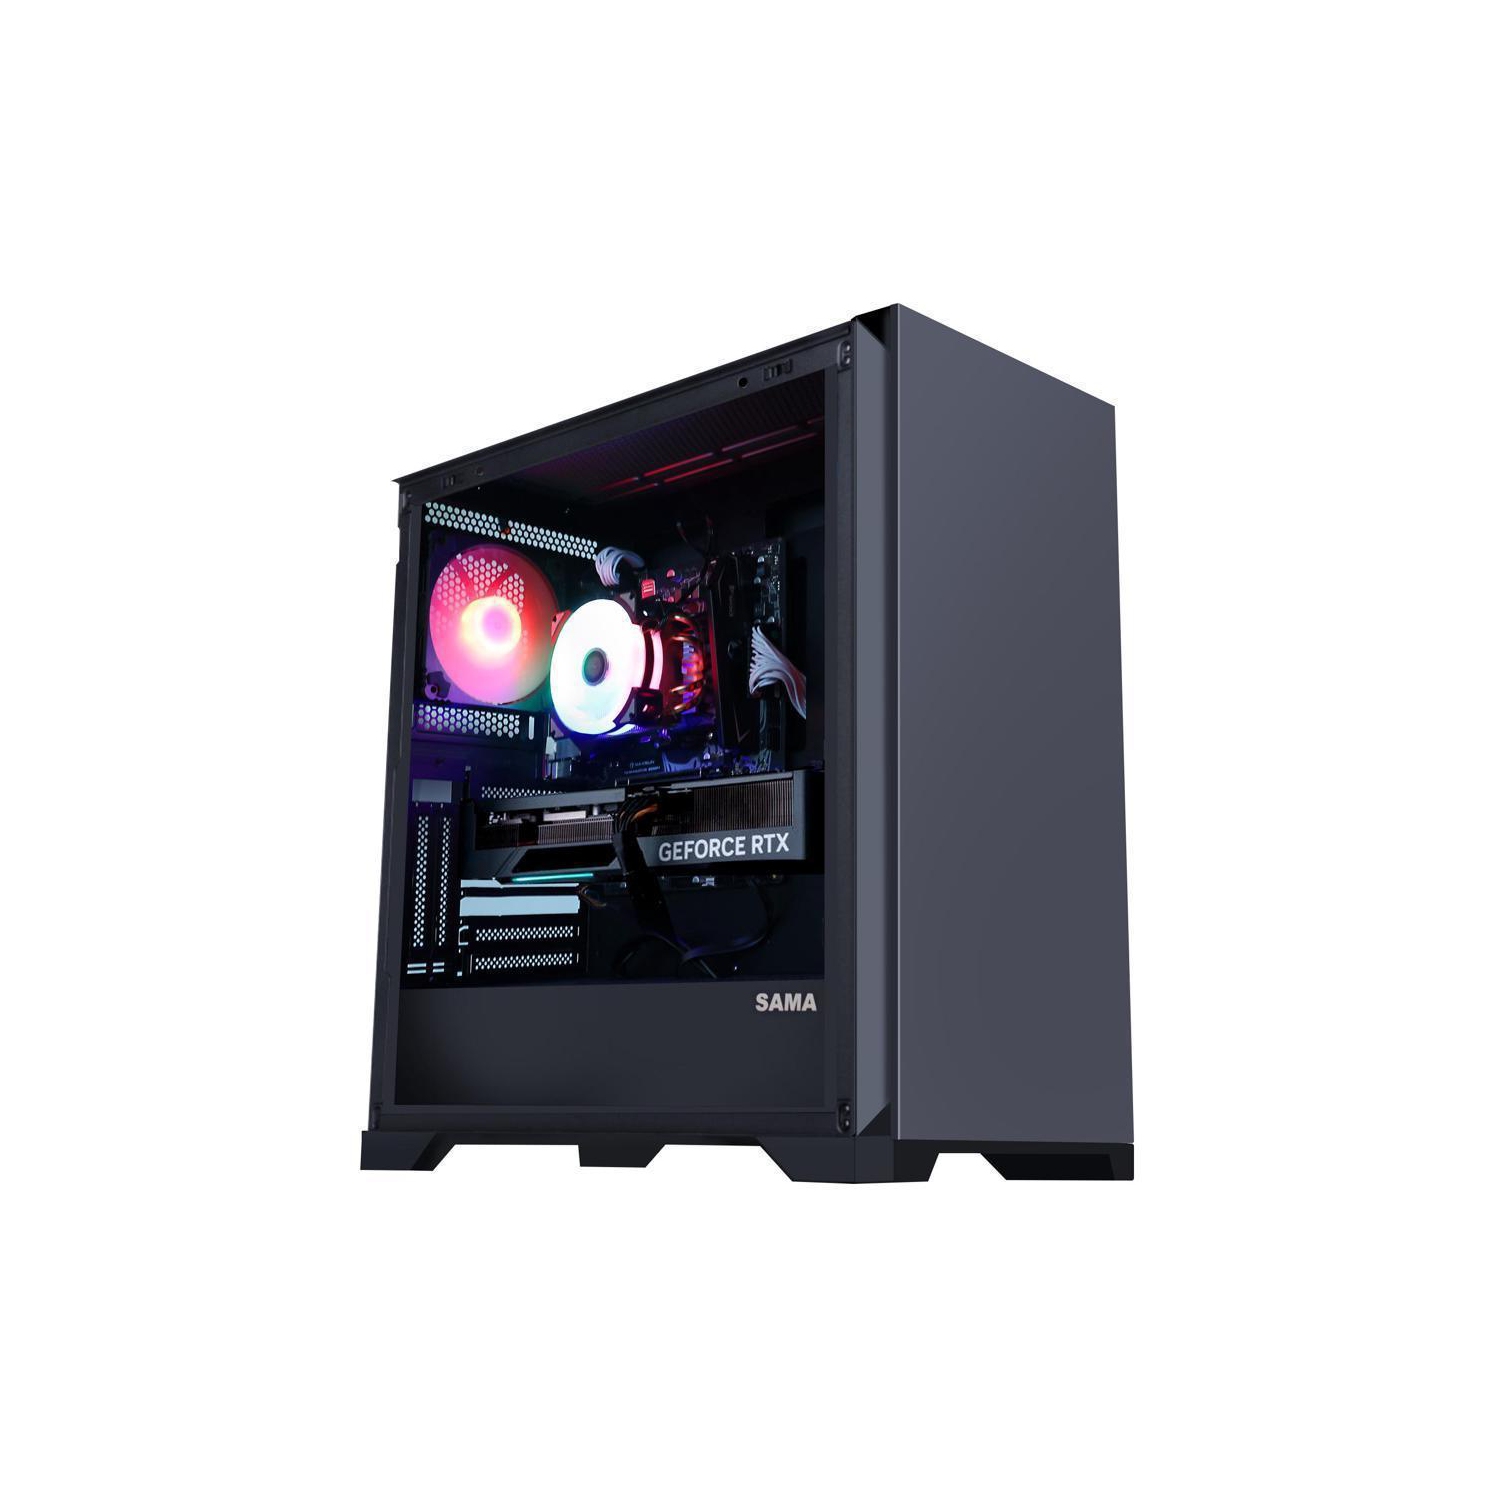 Hoengager Ares Gaming - Intel Core i5-12600K 10-Core 3.7GHz-NVIDIA GeForce RTX 3060 Ti- 32GB DDR4 3200MHz -500GB M.2 + 2TB 2.5'' SATA SSD- WIFI -RGB Fans - Windows 11 Pro Computer